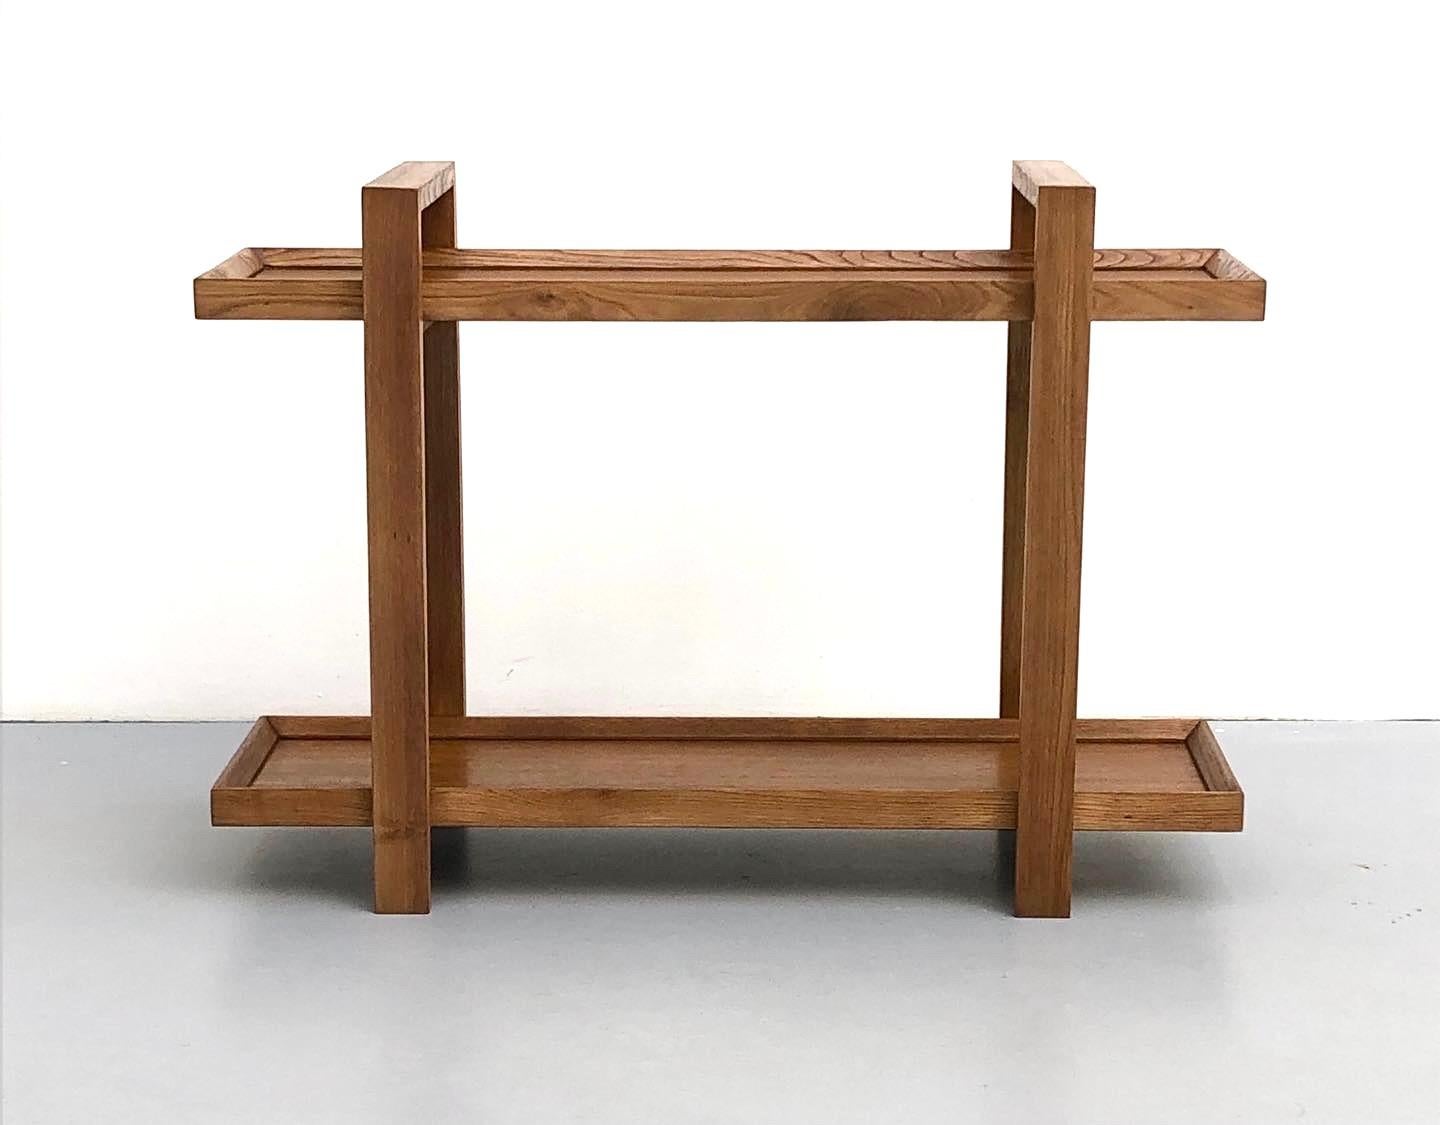 Console/Dessert Table made by René Gabriel, 1940

The object consists of two arches connected by two trays, all made of oak wood. With its aesthetic simplicity and strong, decisive lines, the piece feels more contemporary than its 1940s creation